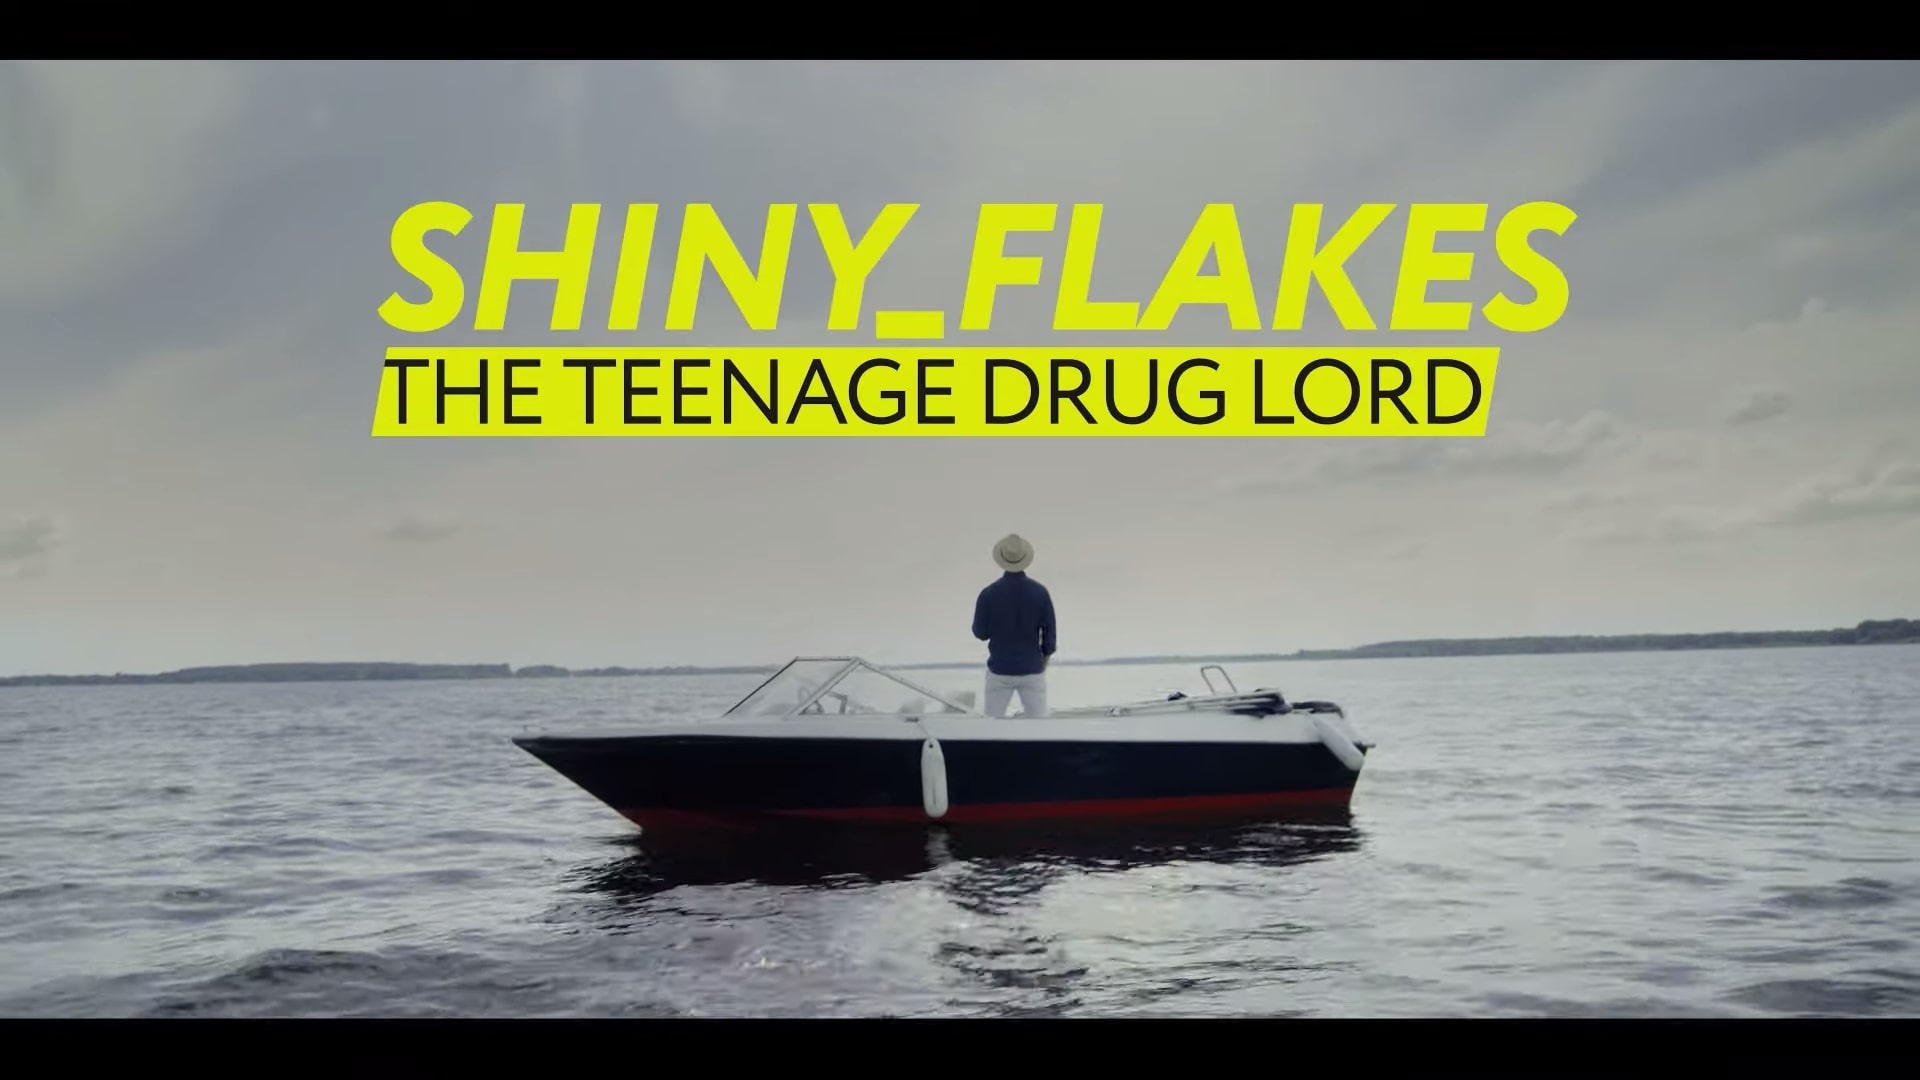 Netflix Shiny Flakes The Teenage Drug Lord Official Trailer, Coming to Netflix in August 2021